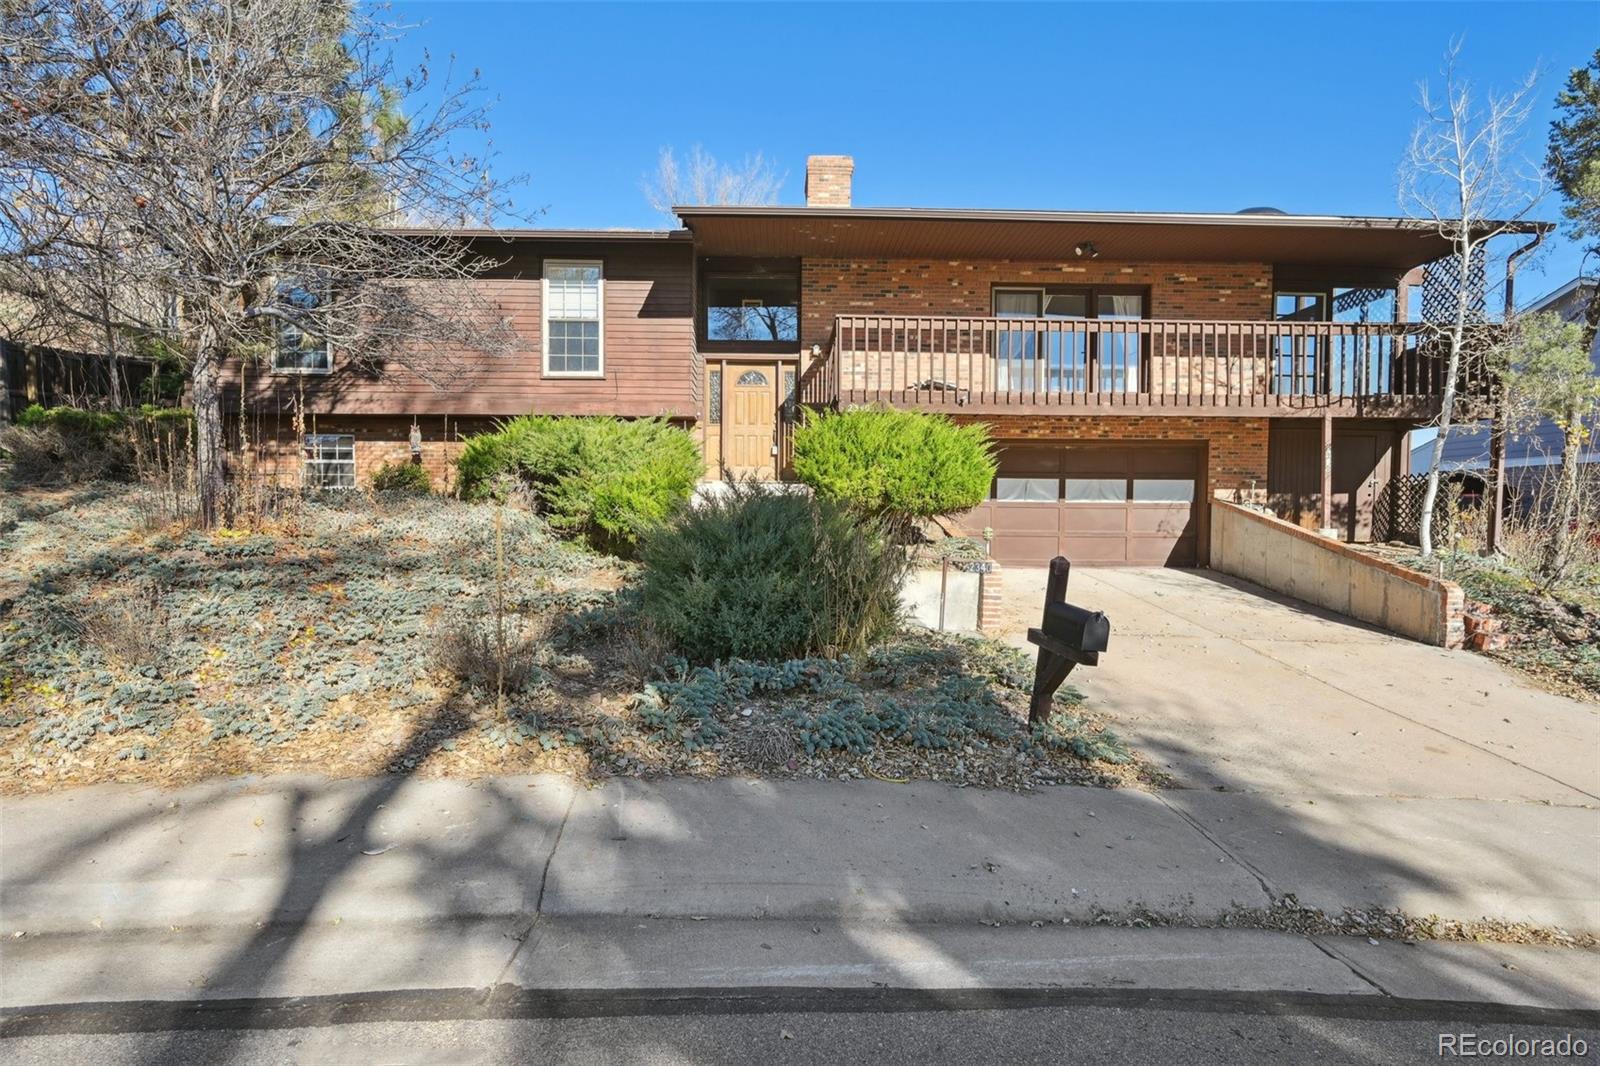 Report Image for 2340 S Garland Court,Lakewood, Colorado